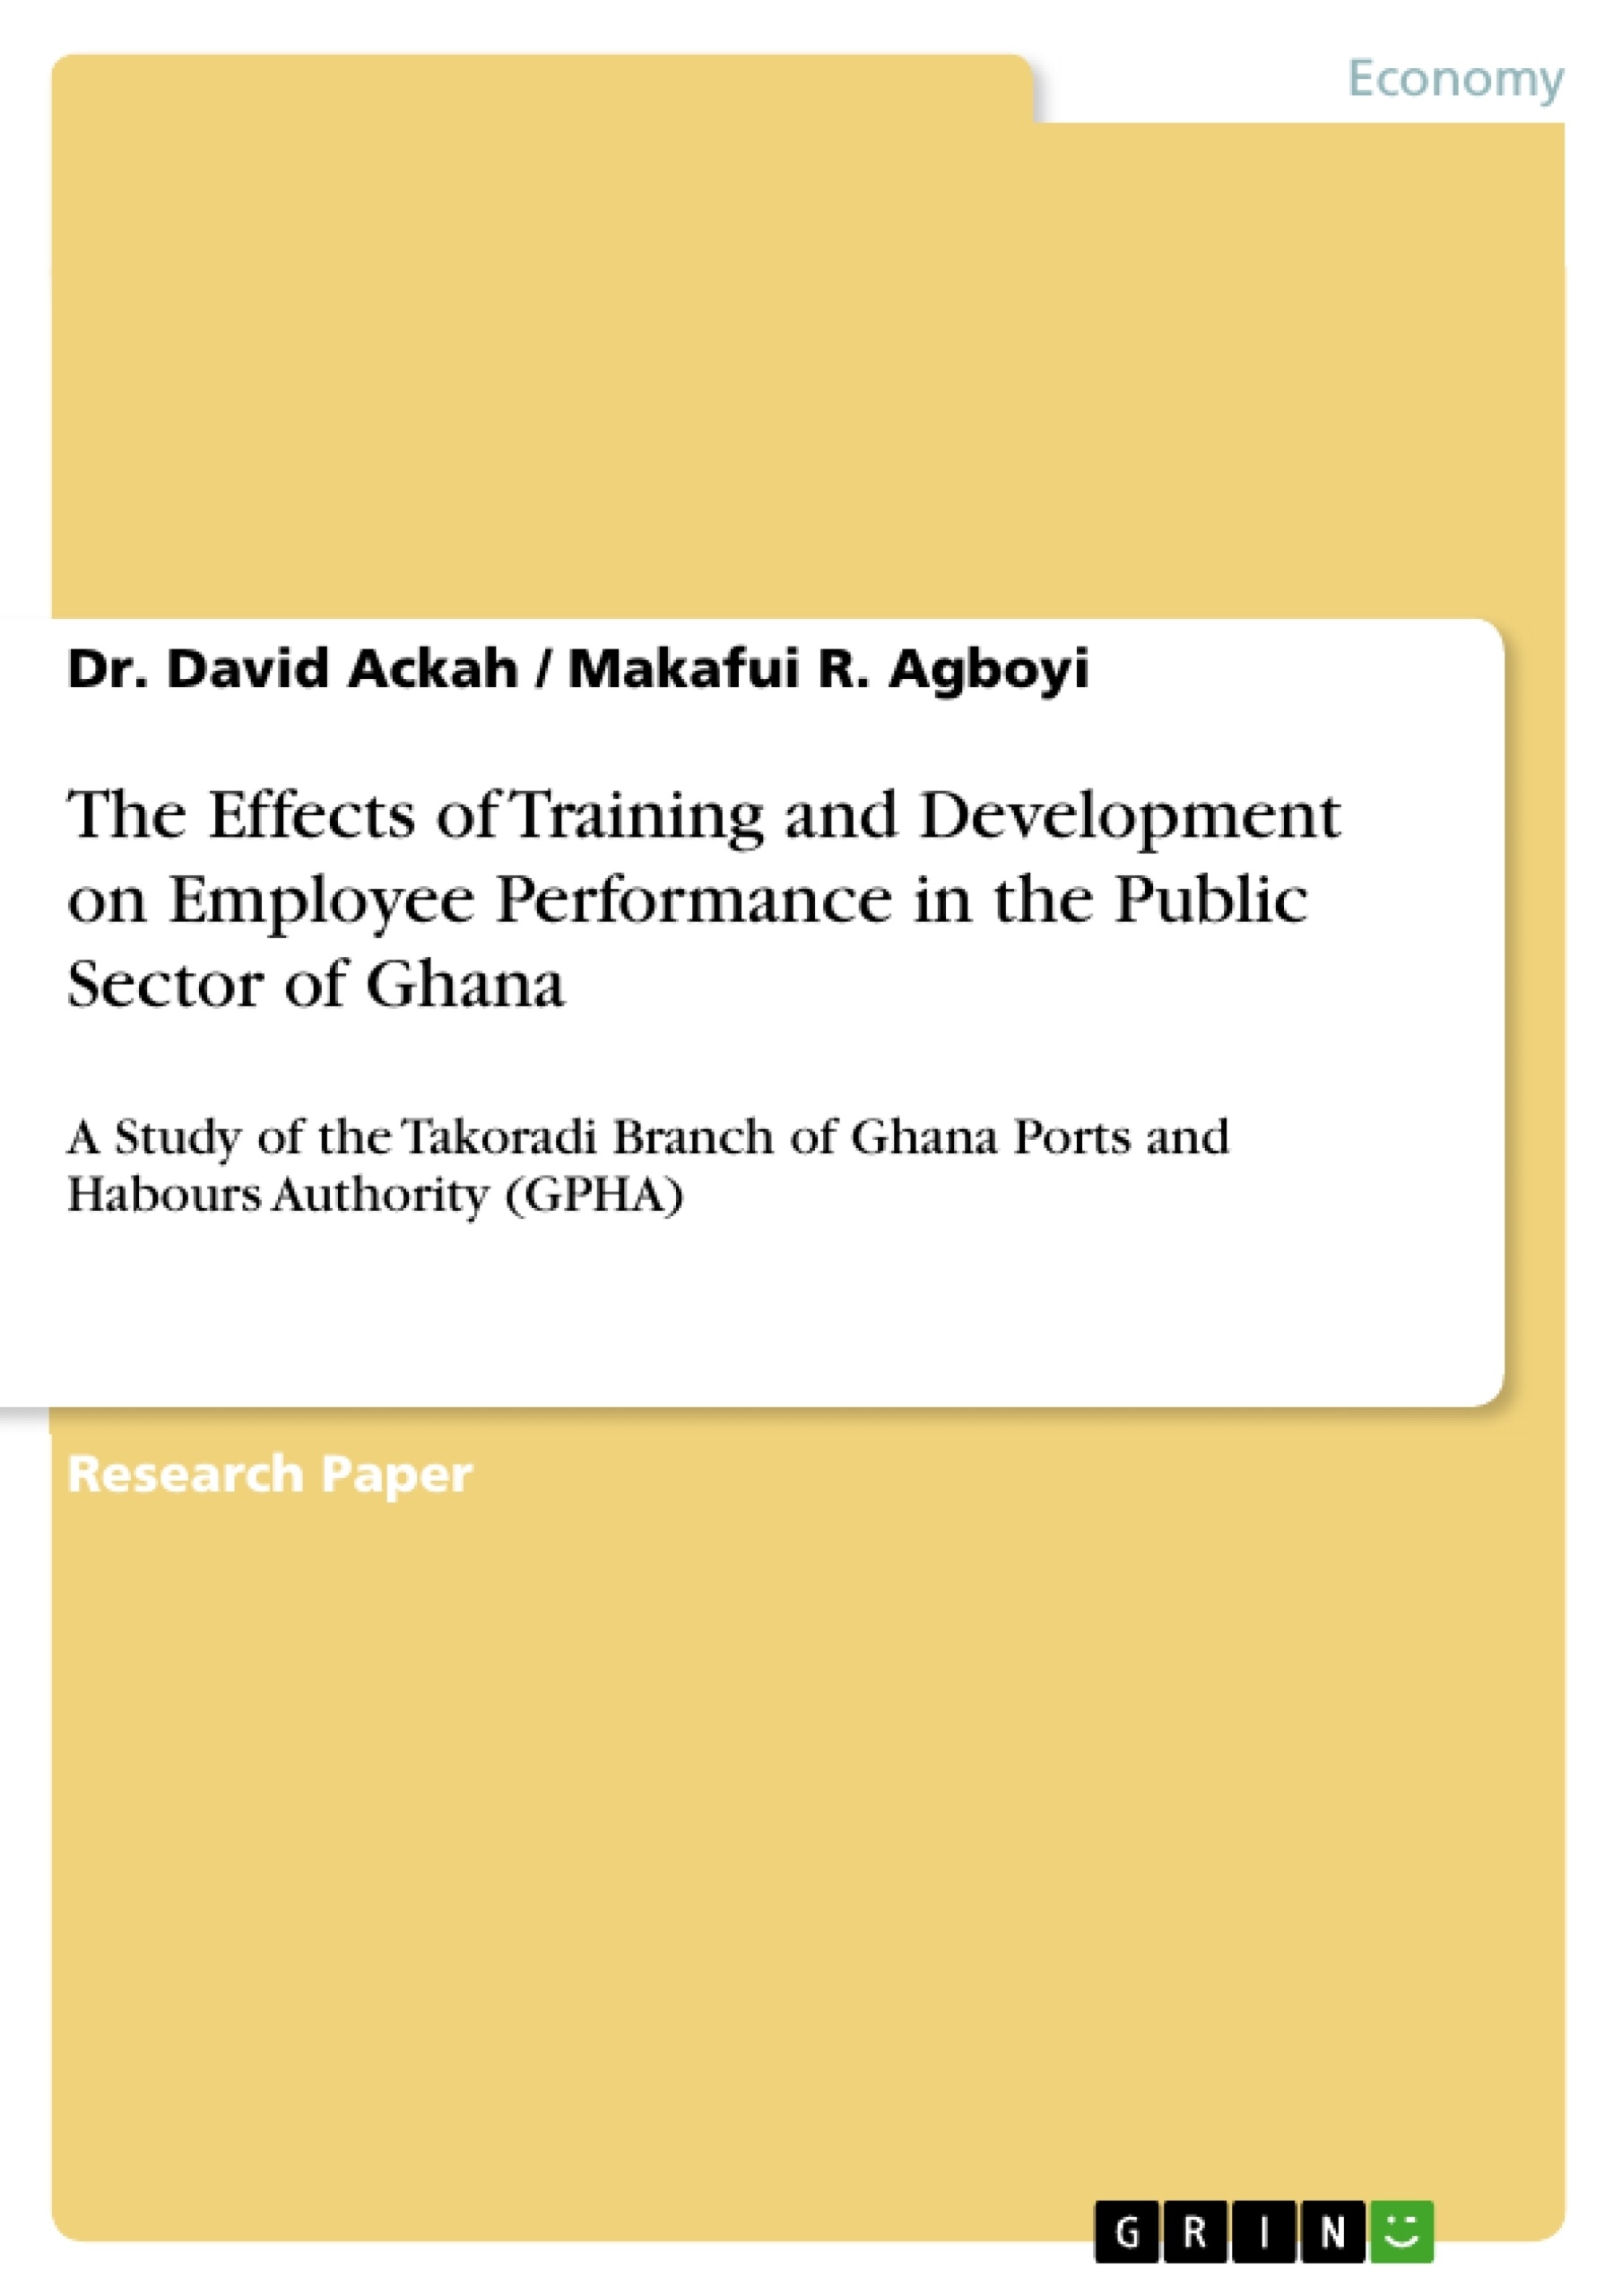 Titre: The Effects of Training and Development on Employee Performance in the Public Sector of Ghana